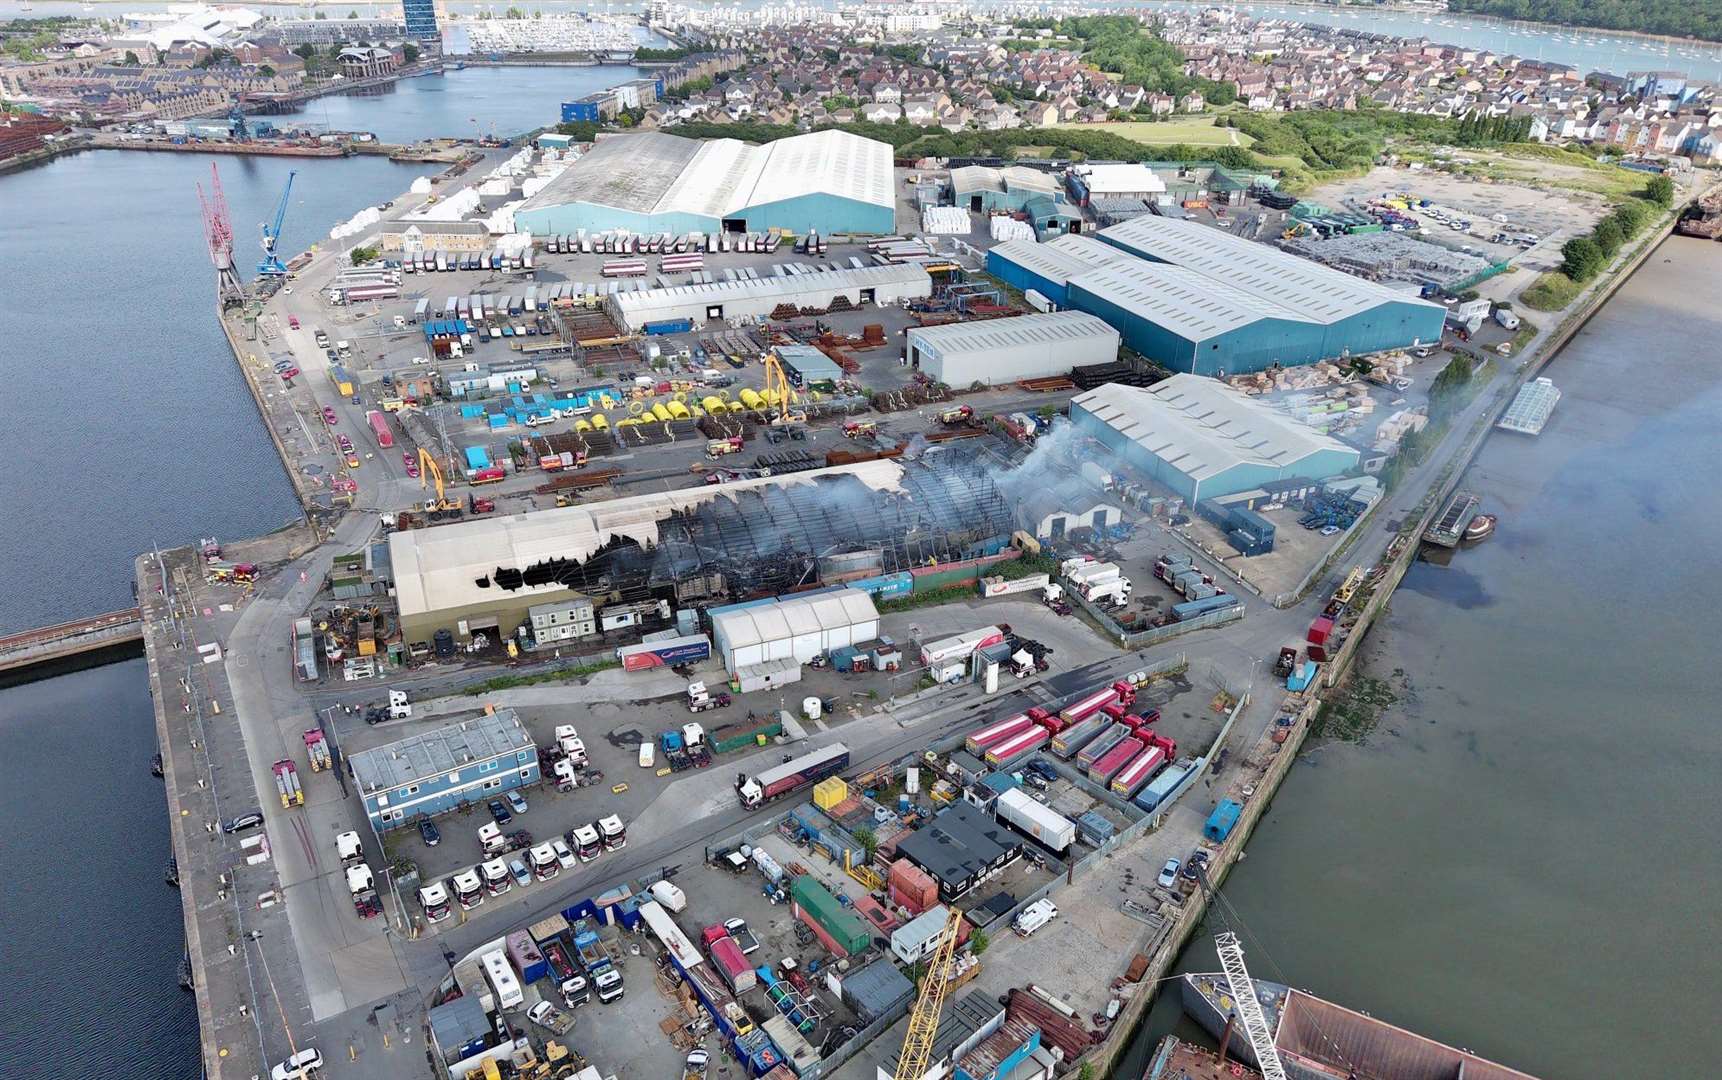 Drone images show the extent of the damage to the warehouse at Chatham Docks. Picture: @AerialimagingSE